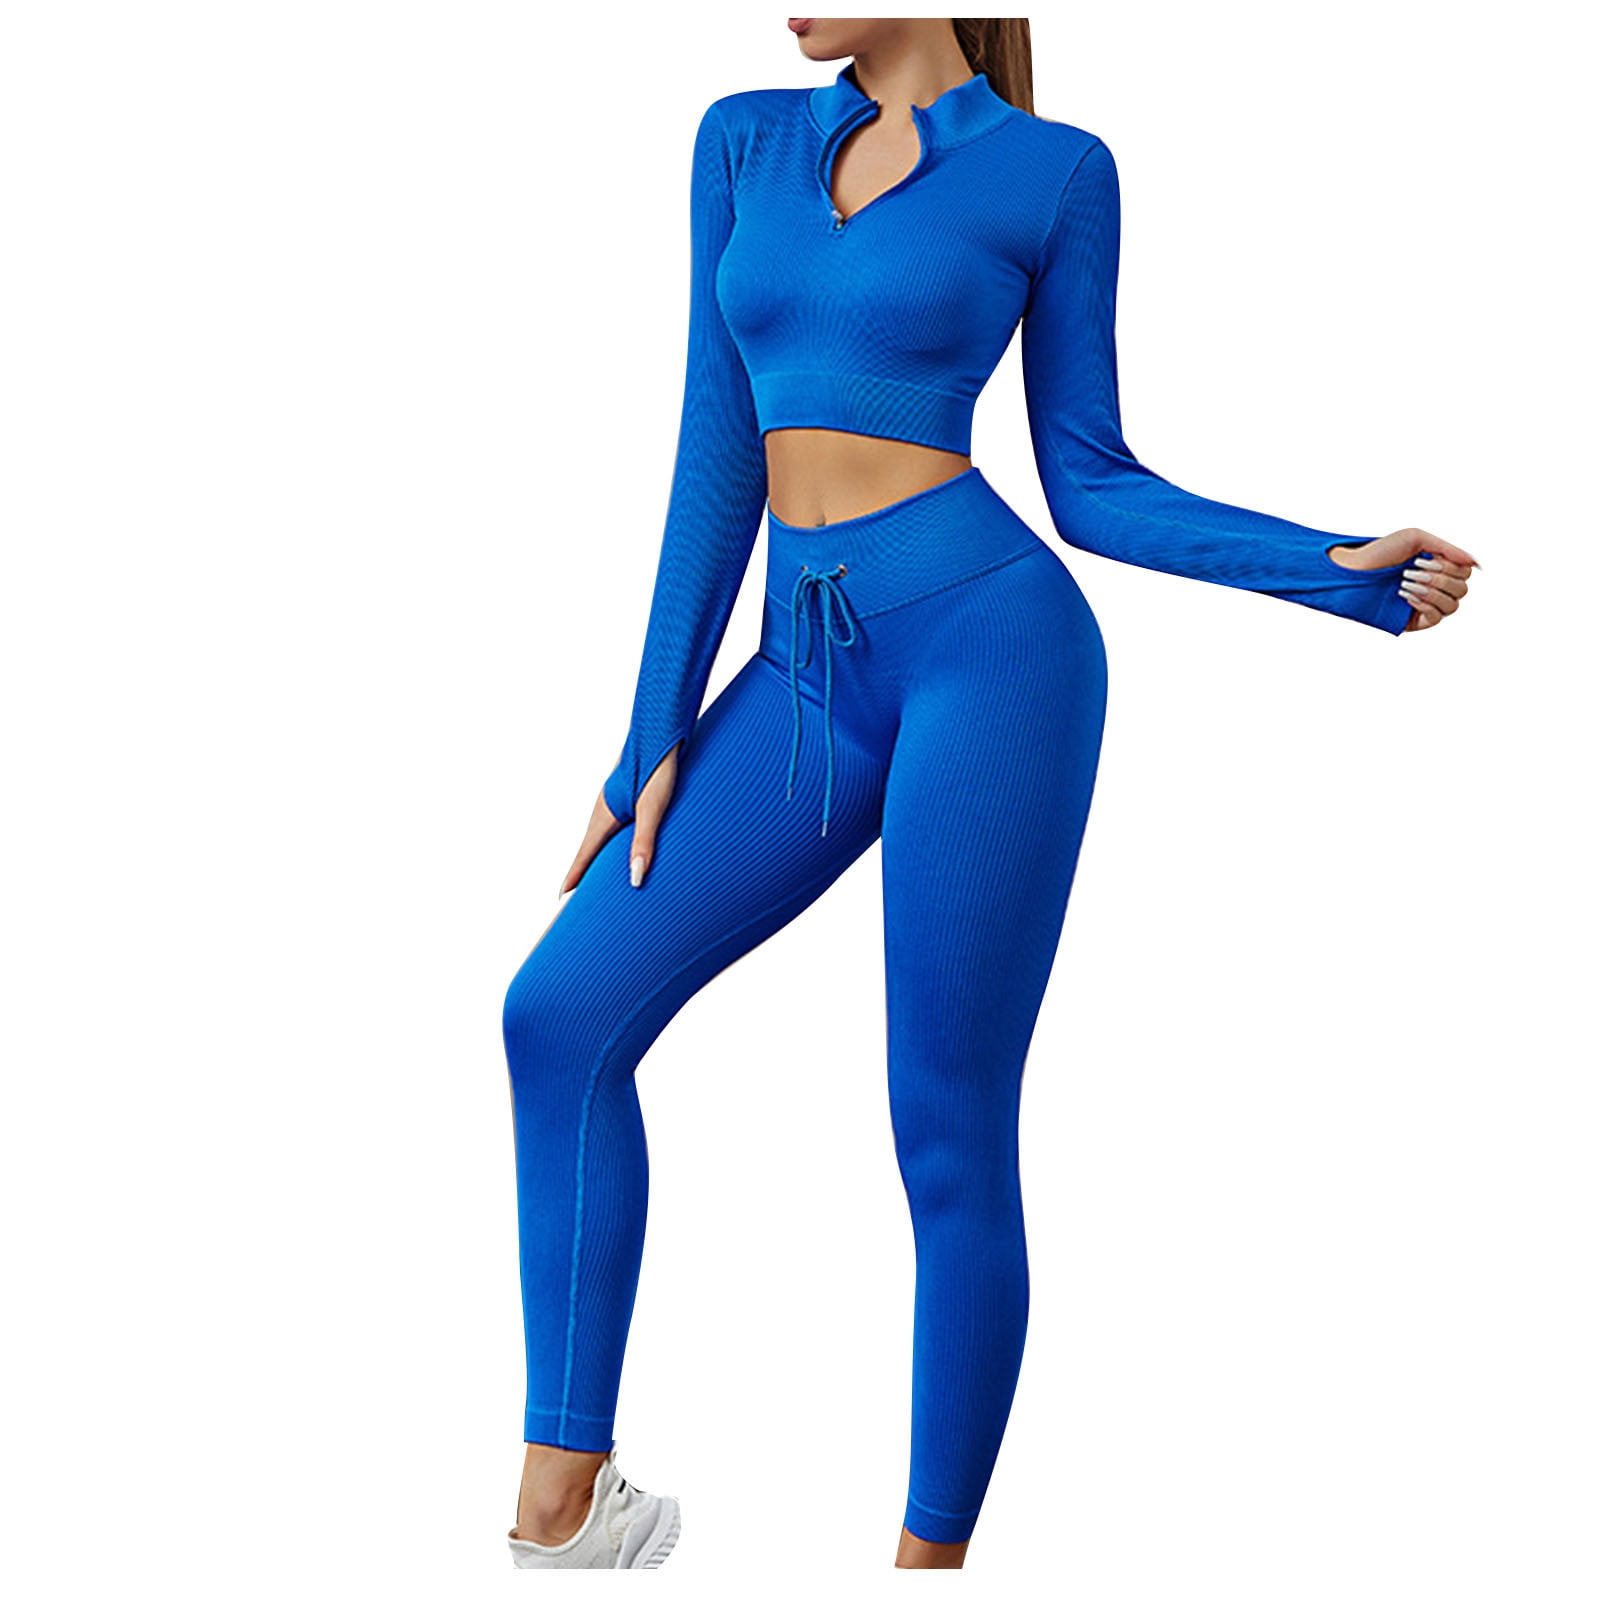 Jalioing Yoga Outwork Suits for Women Stand Collar Half Zip Top High Rise  Stretchy Skinny Cozy Athletic Sets (Small, Blue)